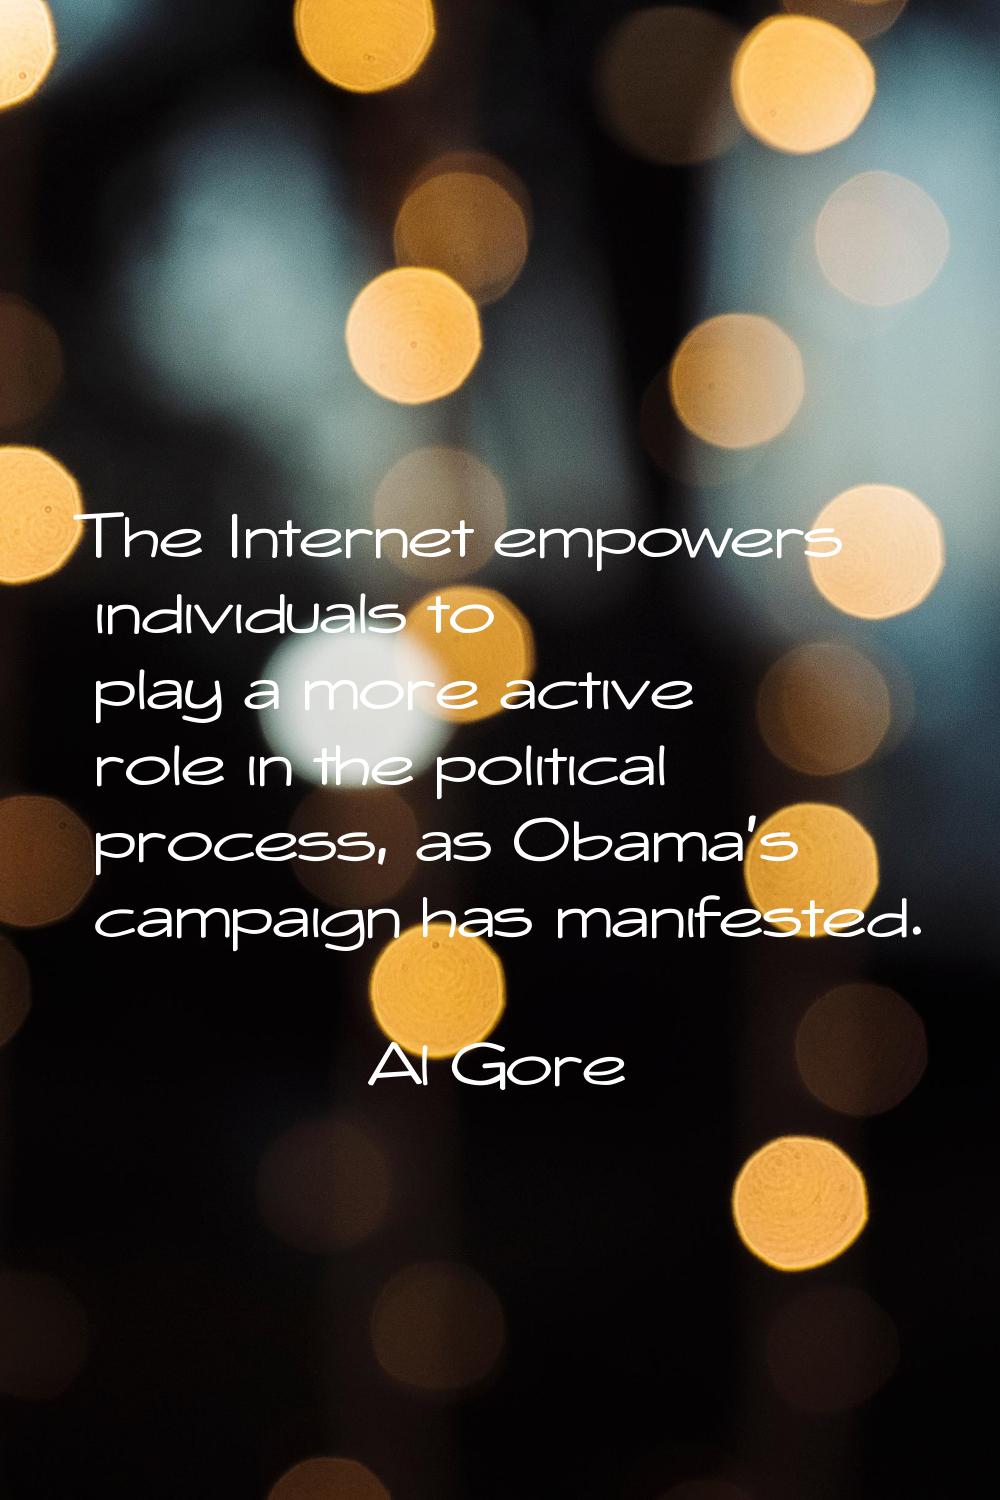 The Internet empowers individuals to play a more active role in the political process, as Obama's c